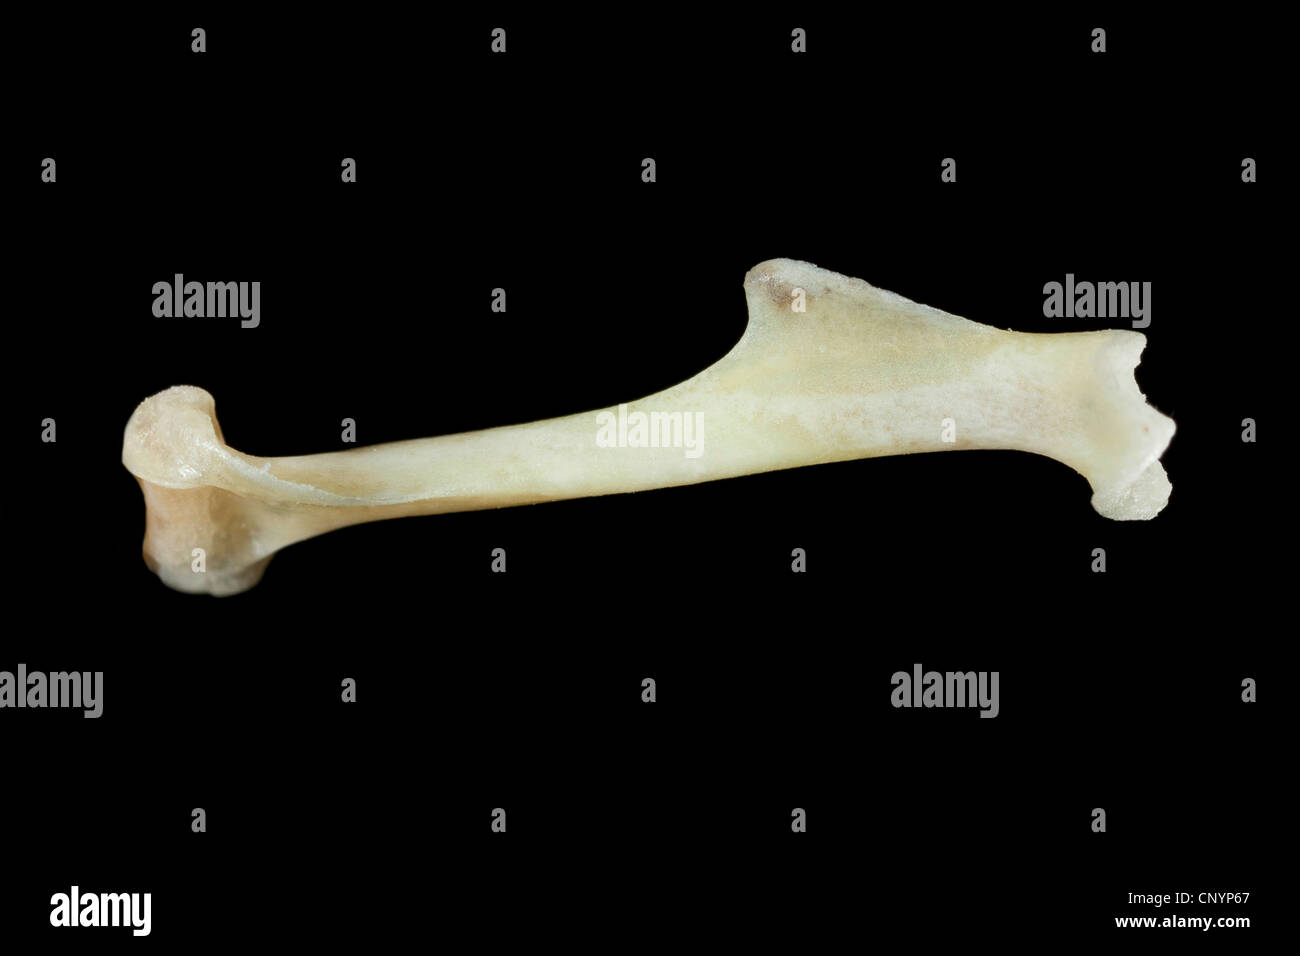 Barn owl (Tyto alba), upper arm bone of a mouse, undigested food residue from a pellet Stock Photo